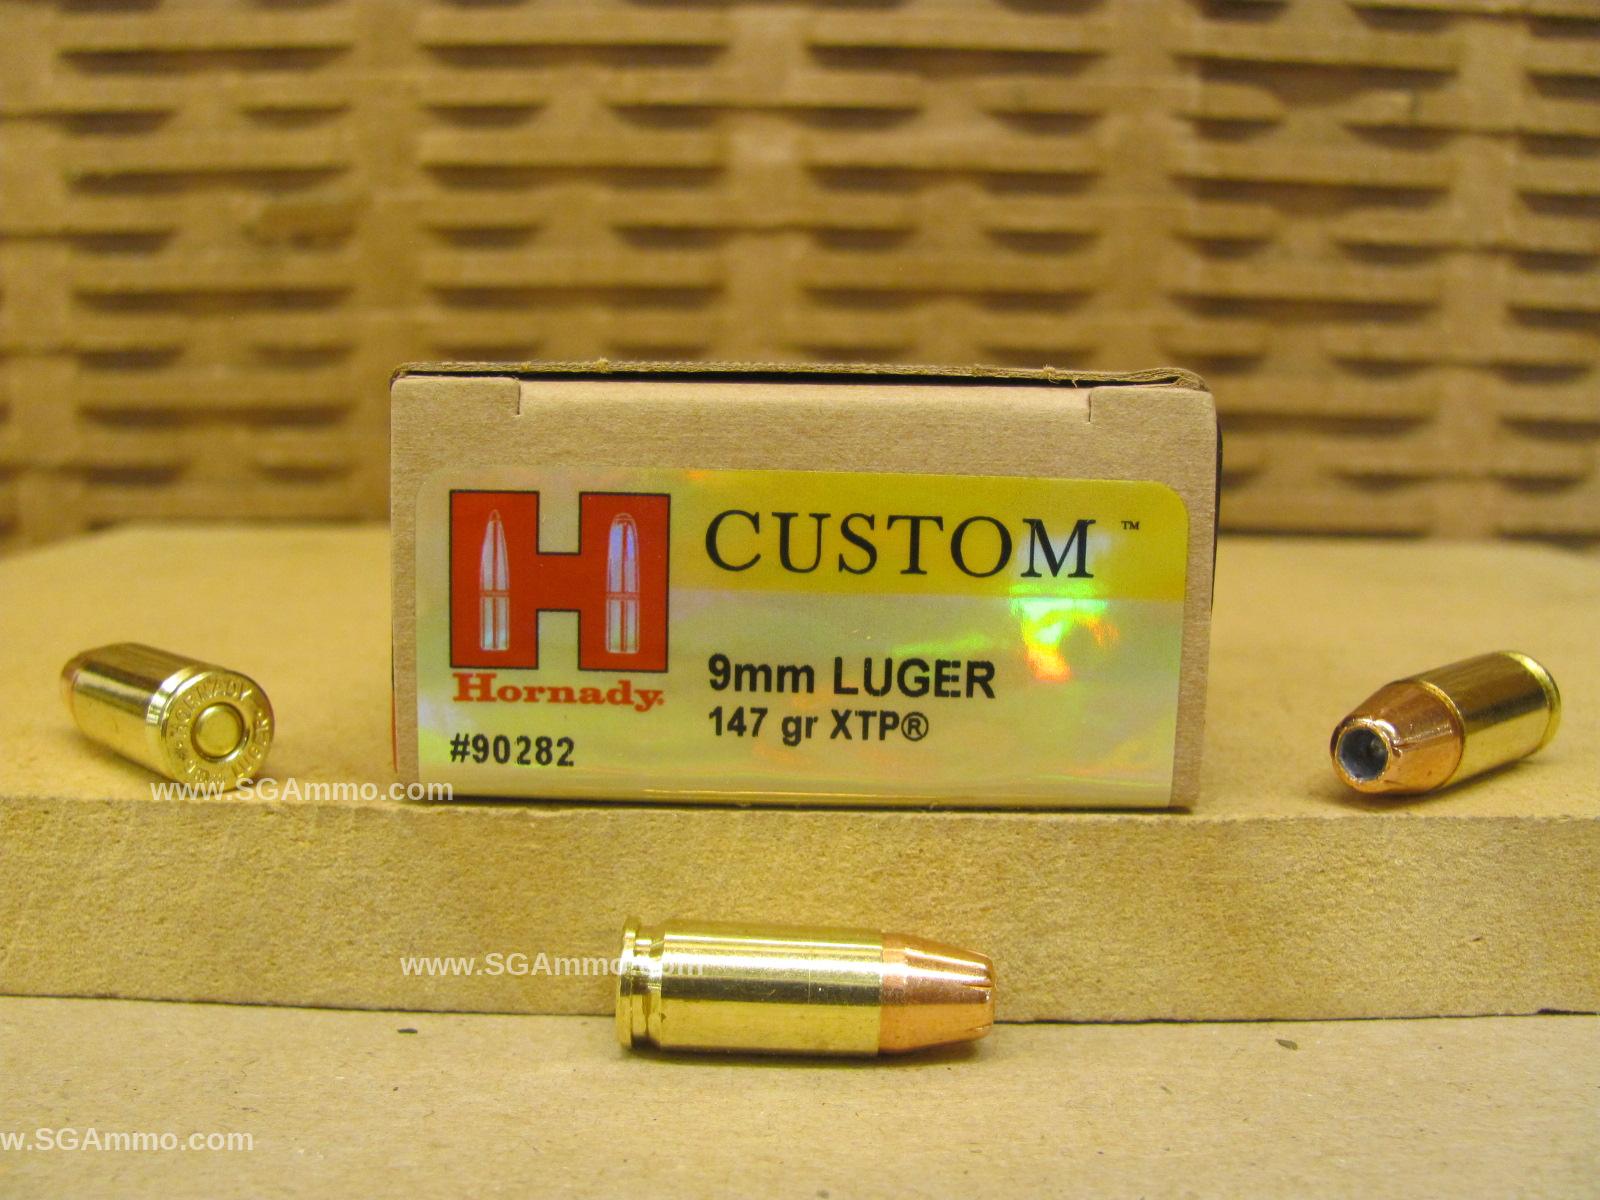 25 Round Box - 9mm Luger 147 Grain XTP Hollow Point Ammo by Hornady - 90282